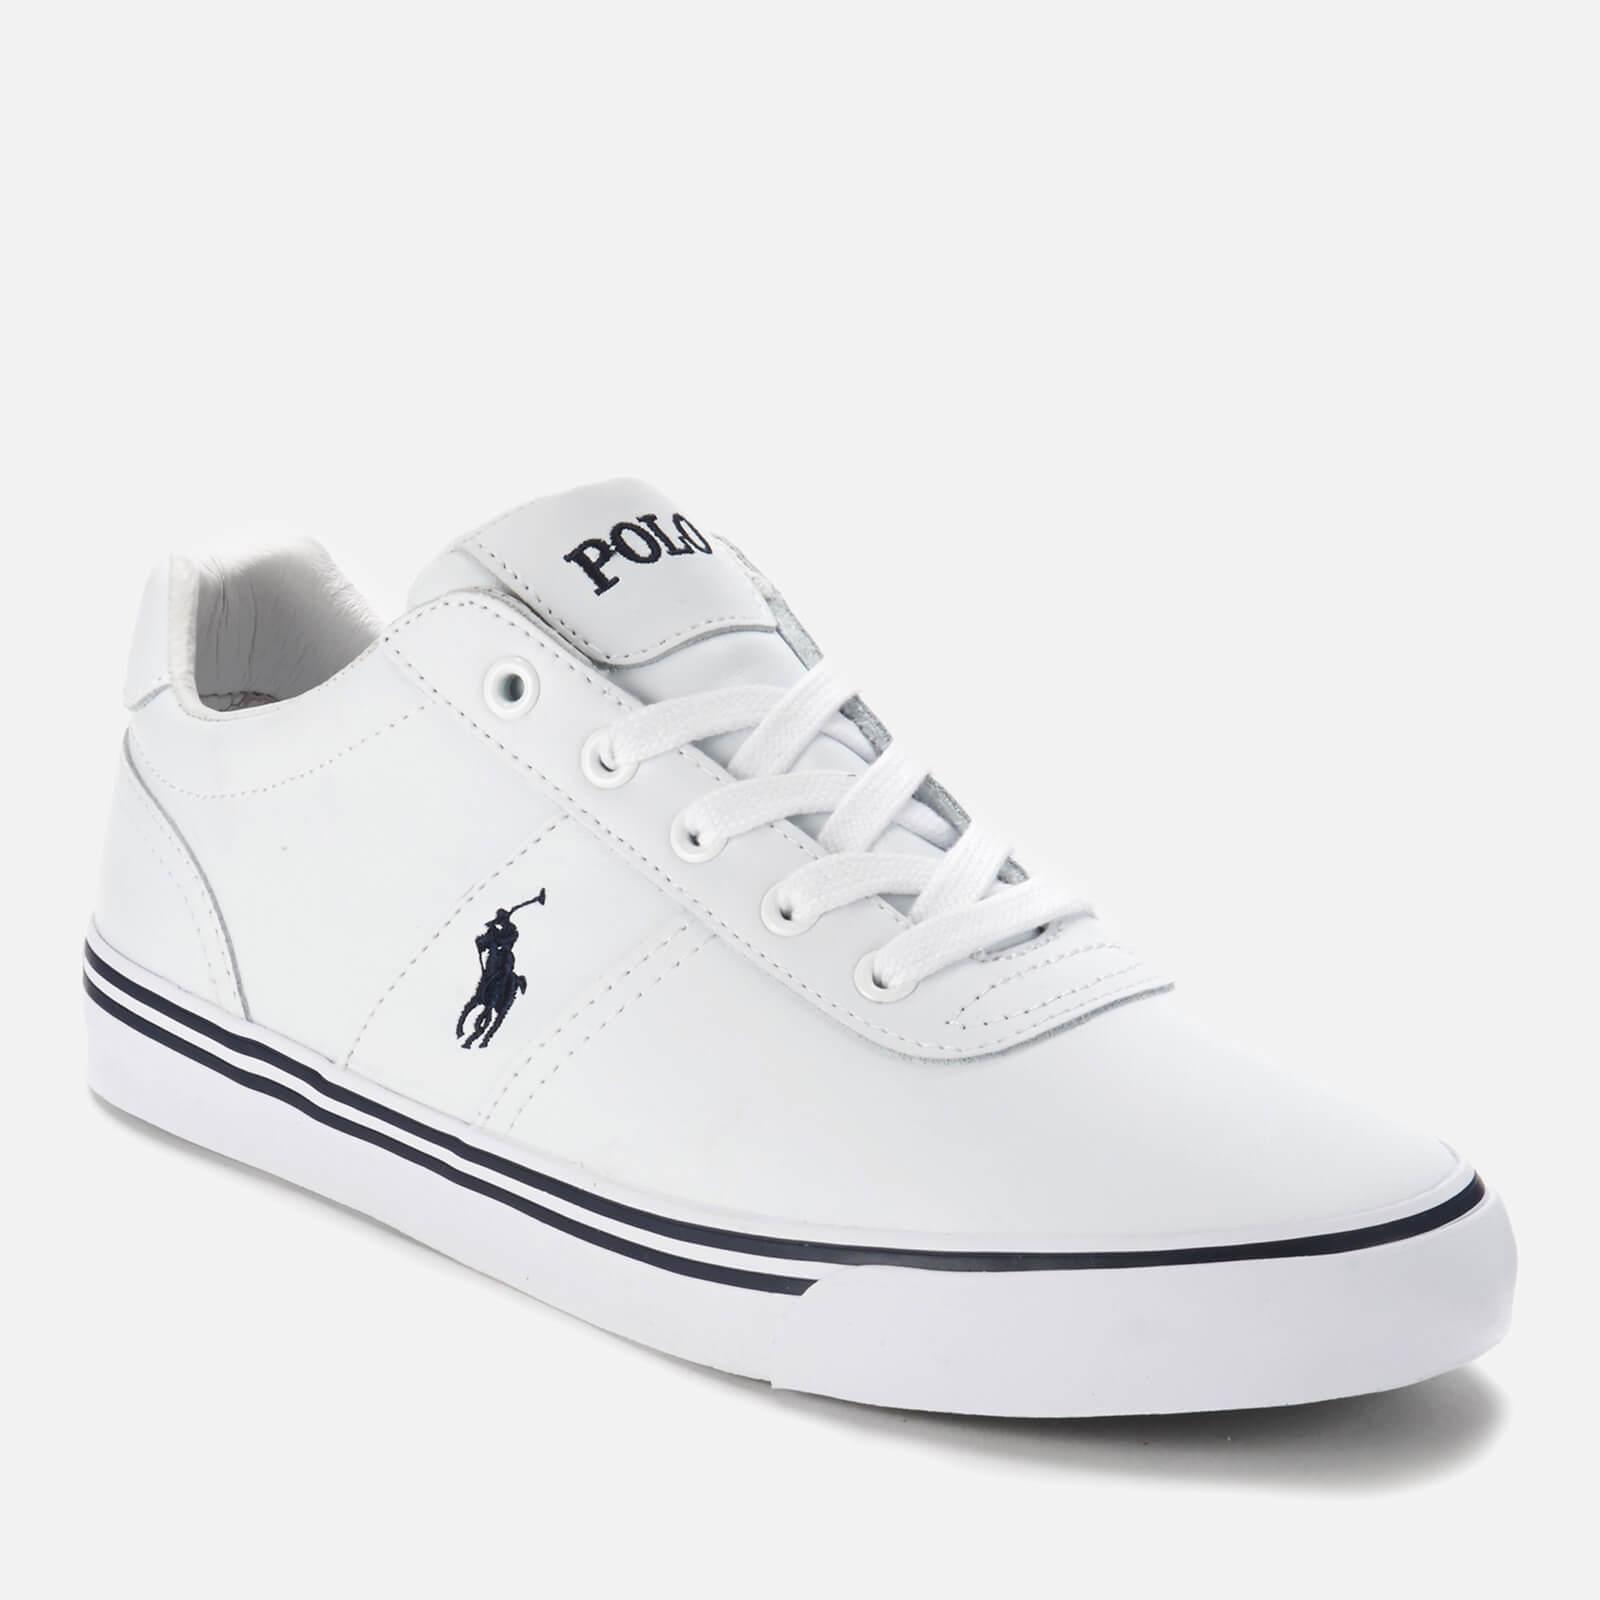 Polo Ralph Lauren Hanford Leather Trainers in White for Men - Lyst